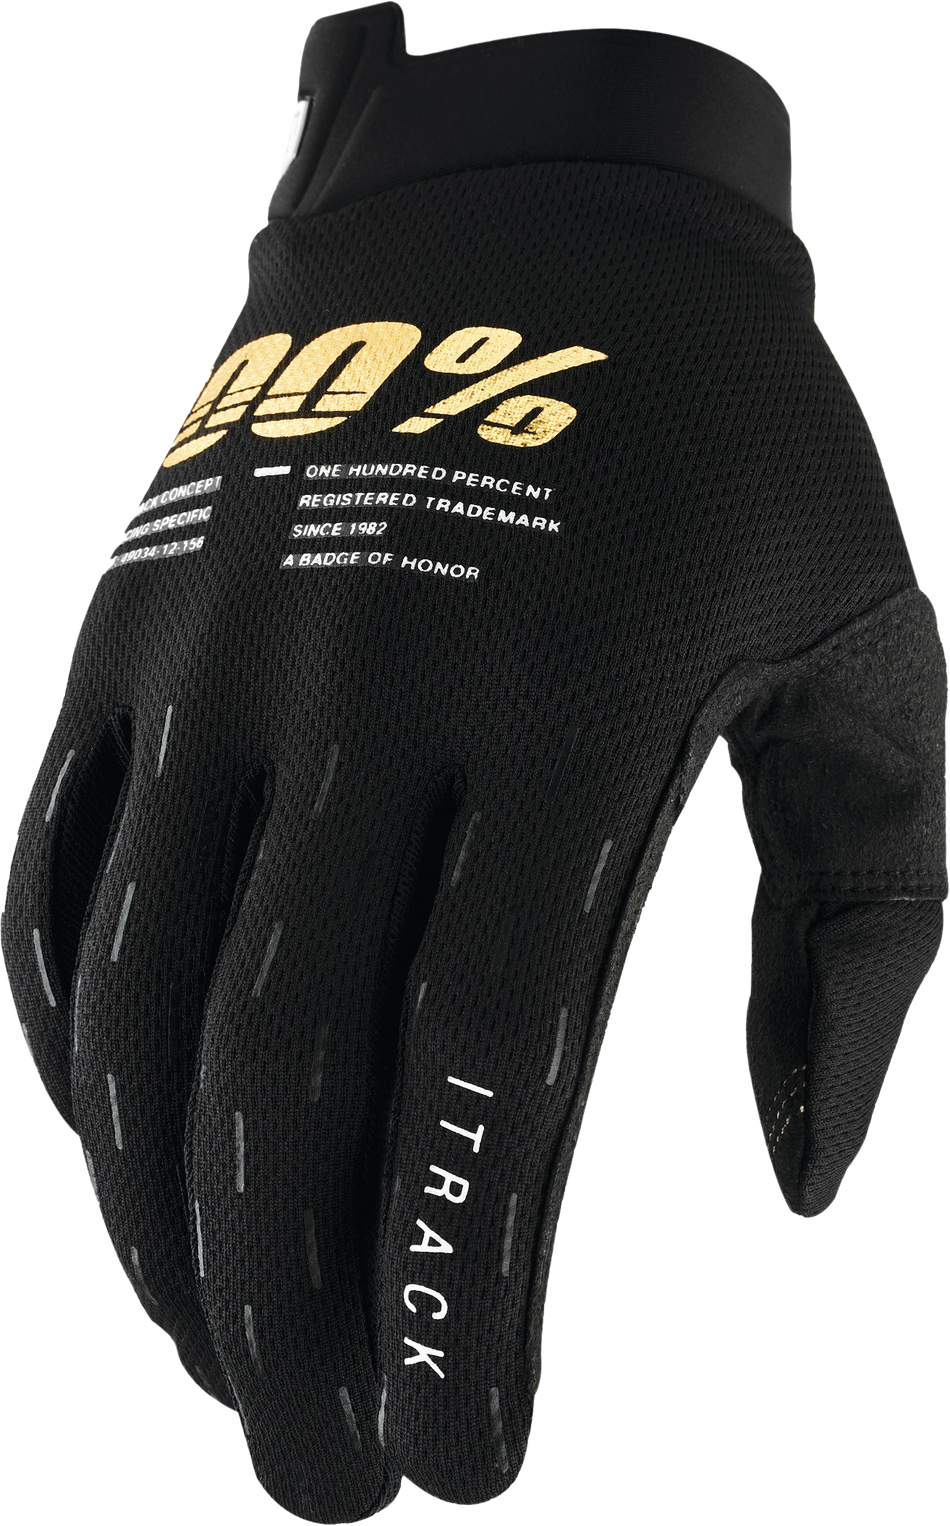 100% Itrack Youth Gloves Black Sm 10009-00000